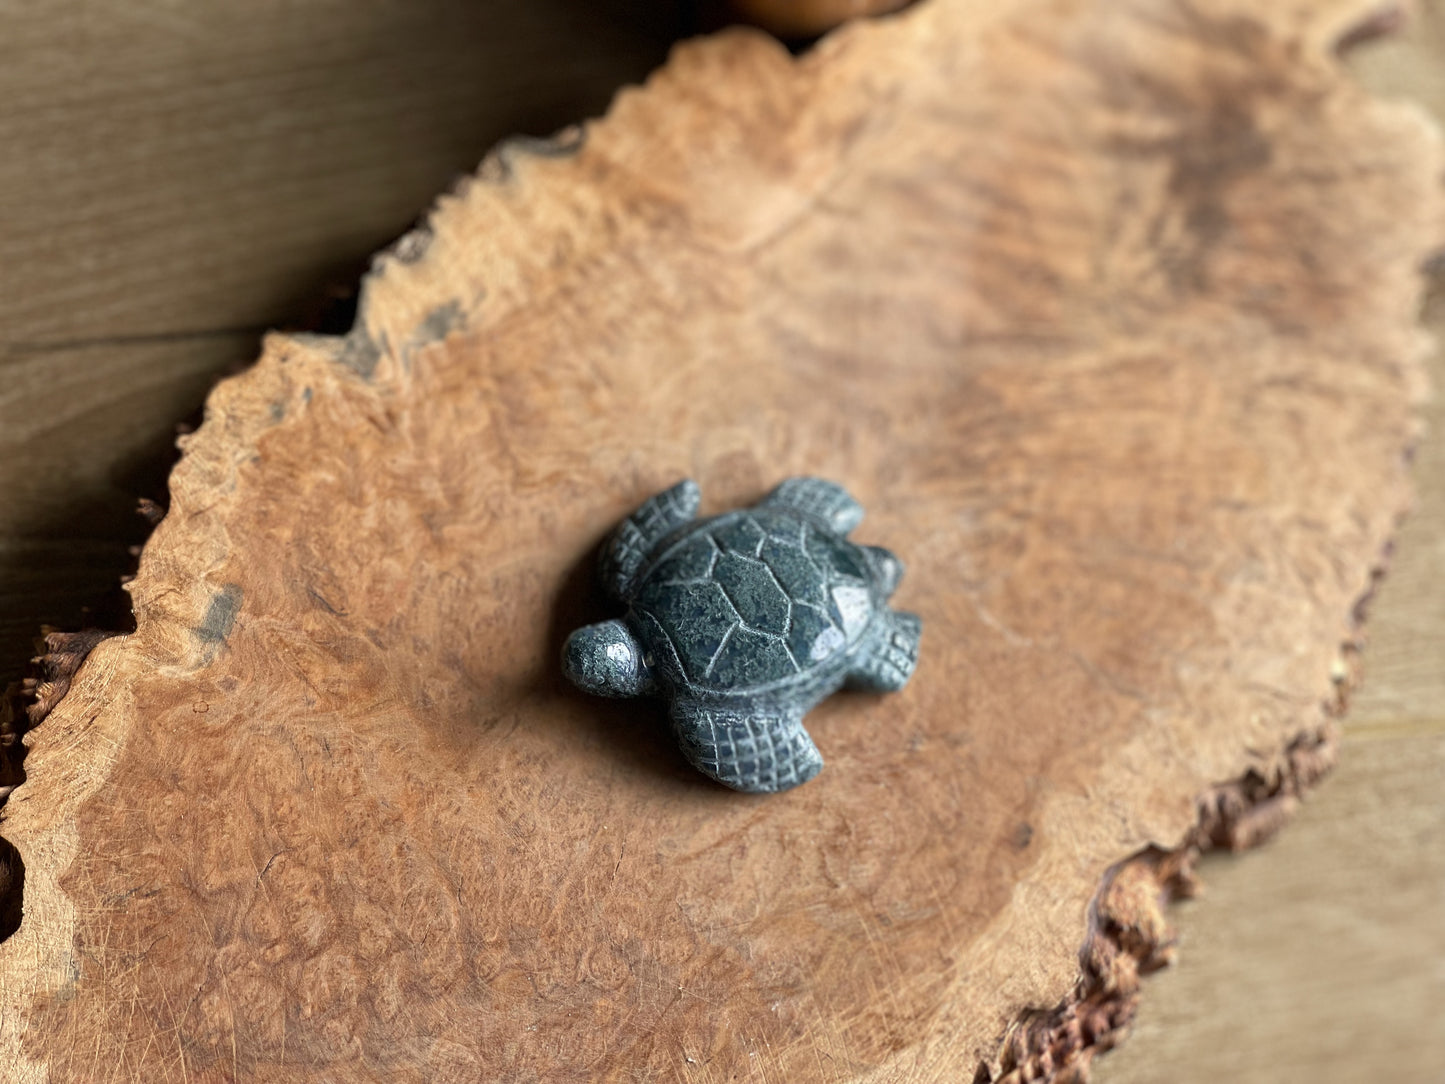 Moss agate small turtle